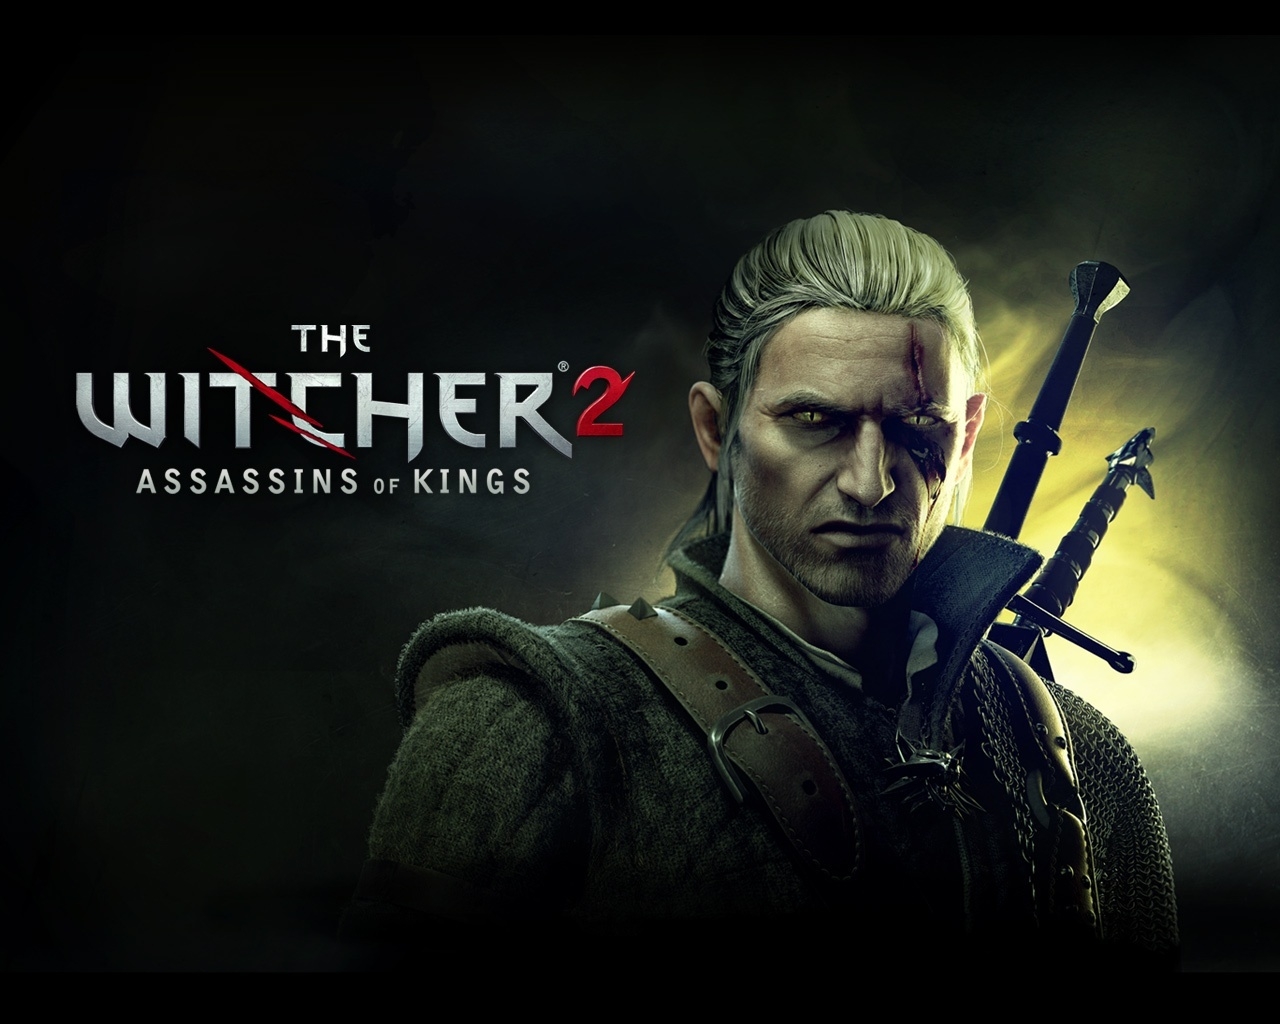 The Witcher 2 for 1280 x 1024 resolution